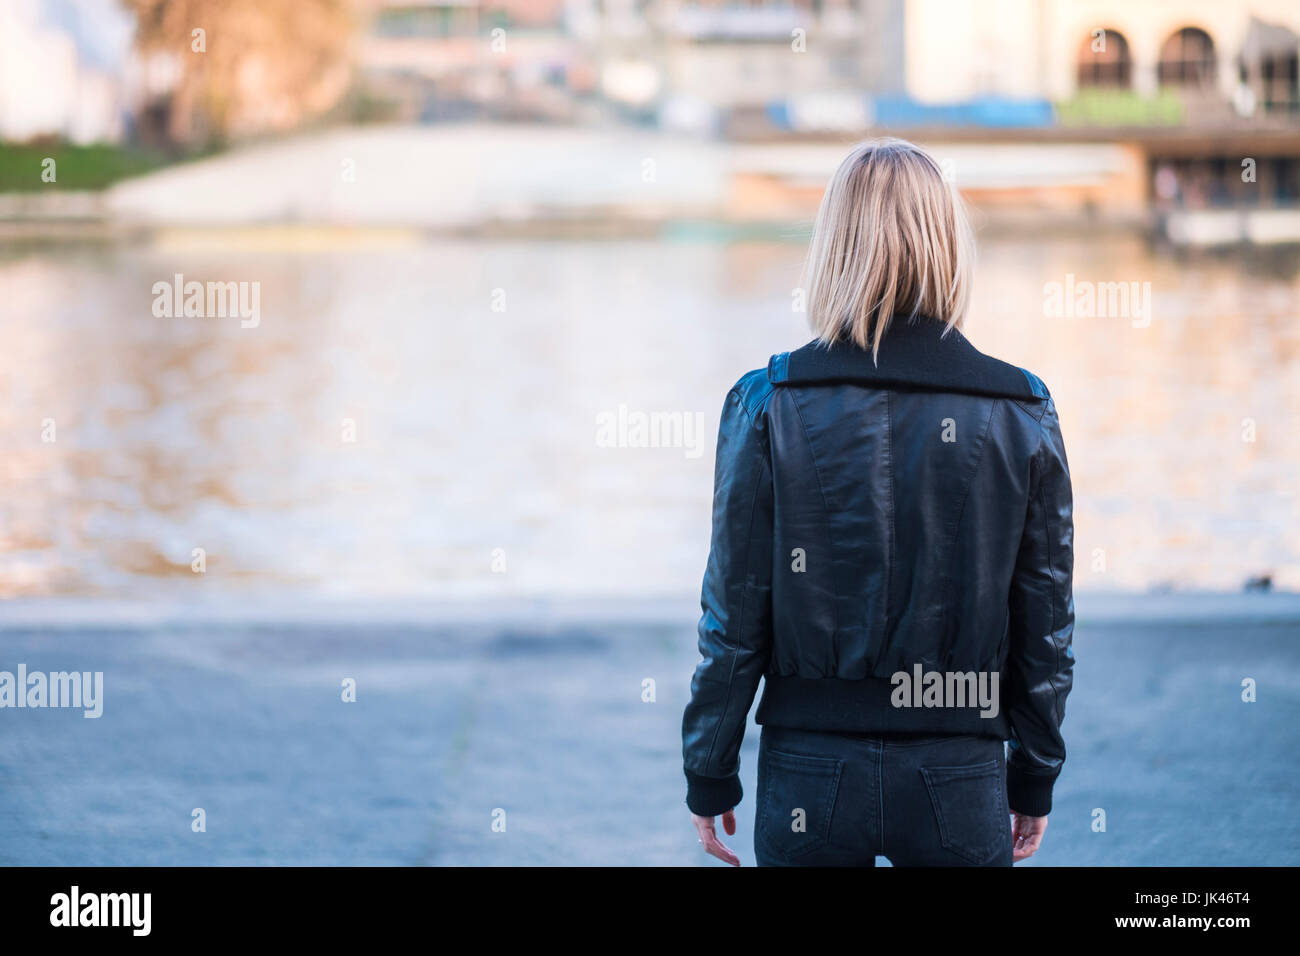 Rear view of Caucasian woman standing near river Stock Photo